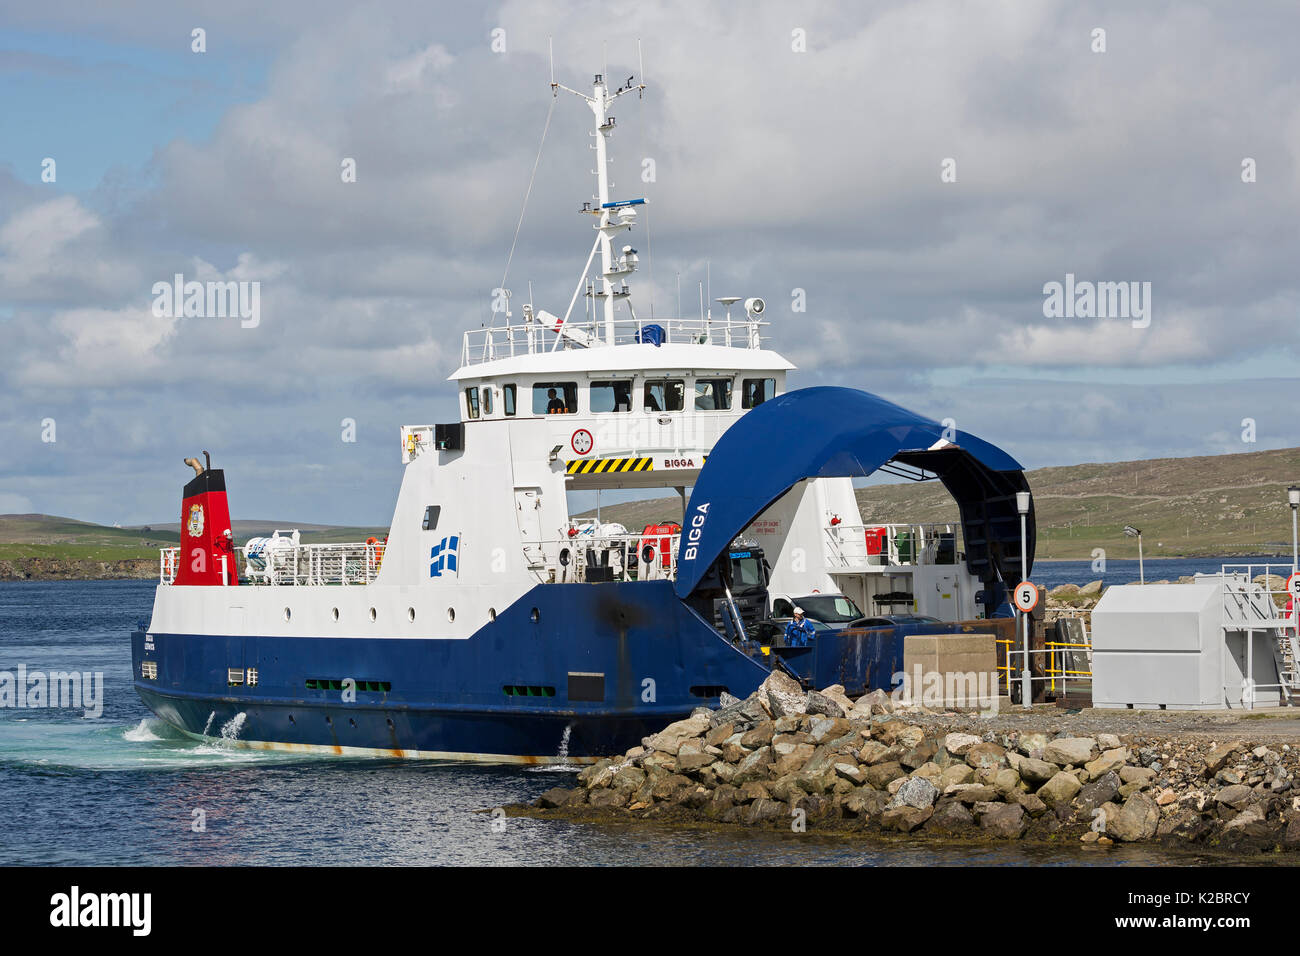 Inter-island ferry 'Bigga' at Yell, one of the North Isles of Shetland, Scotland. All non-editorial uses must be cleared individually. Stock Photo